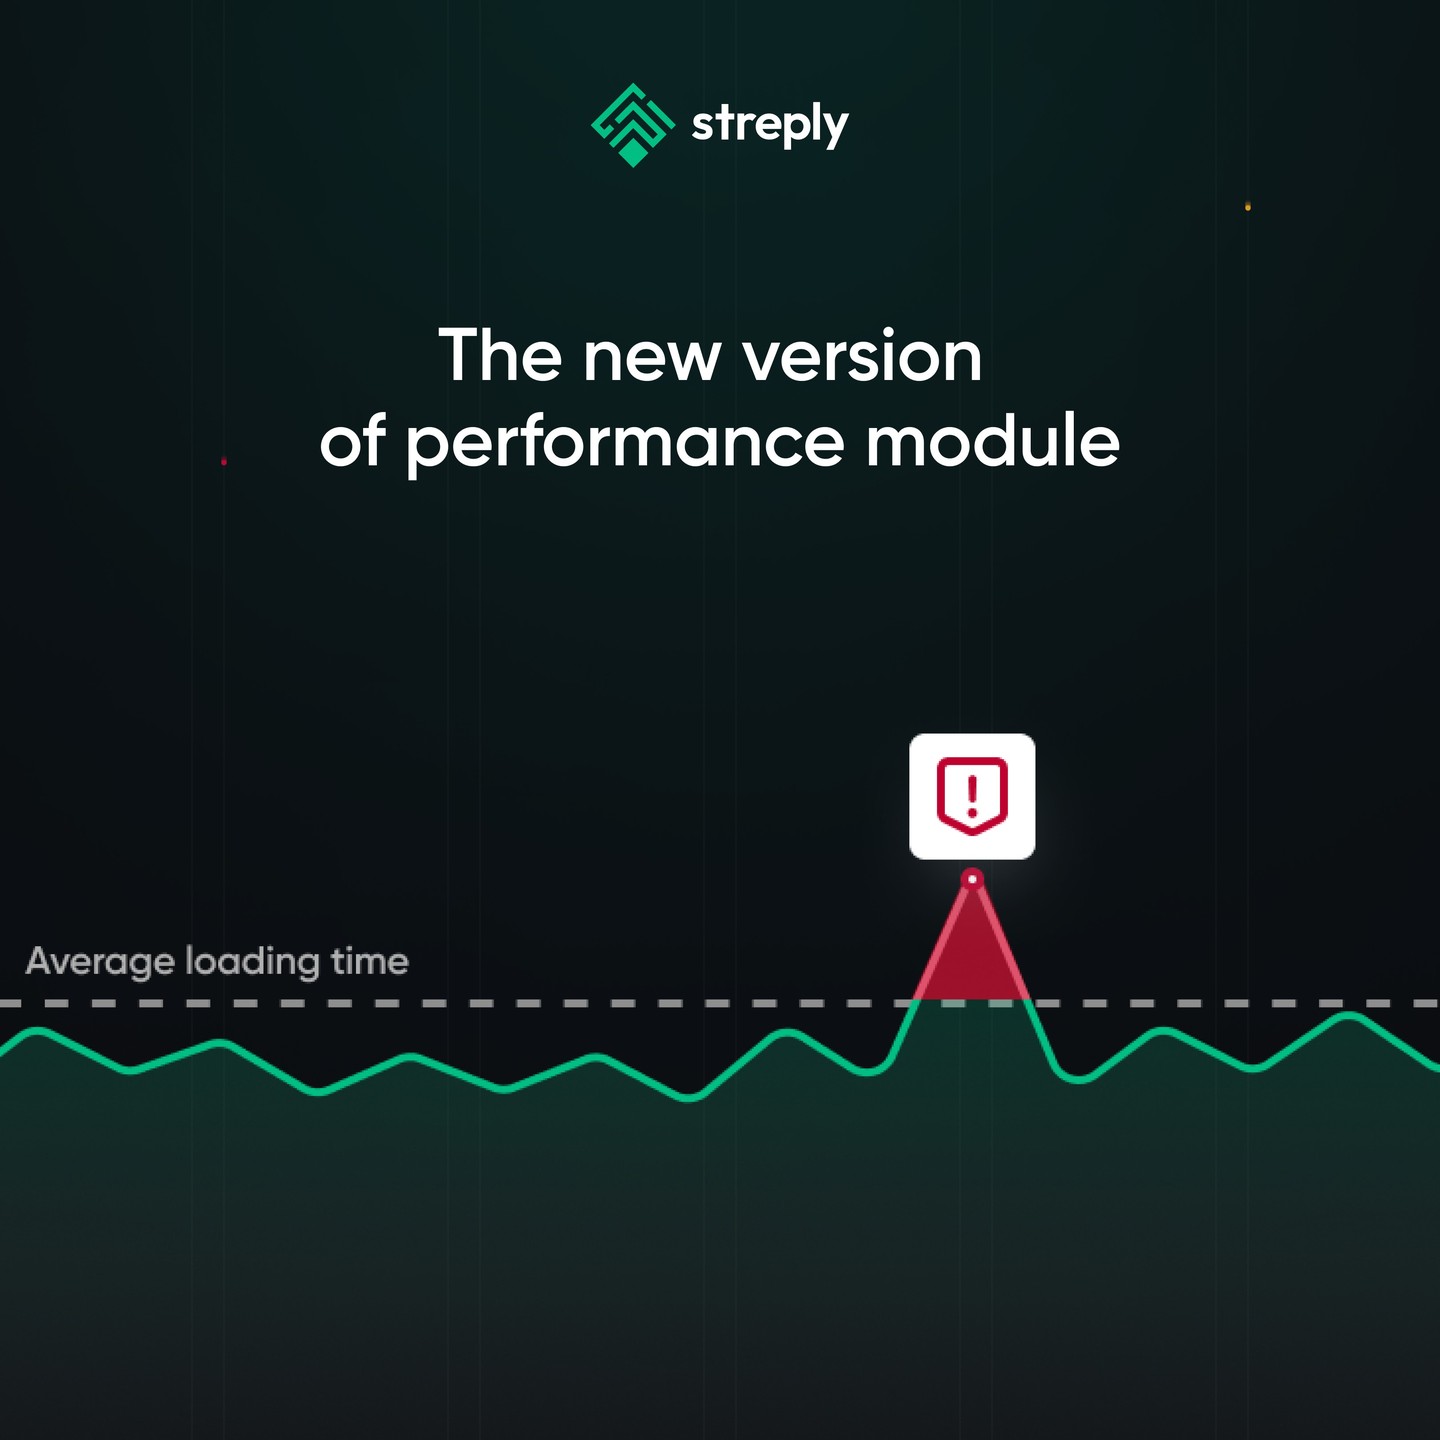 The new version of performance module